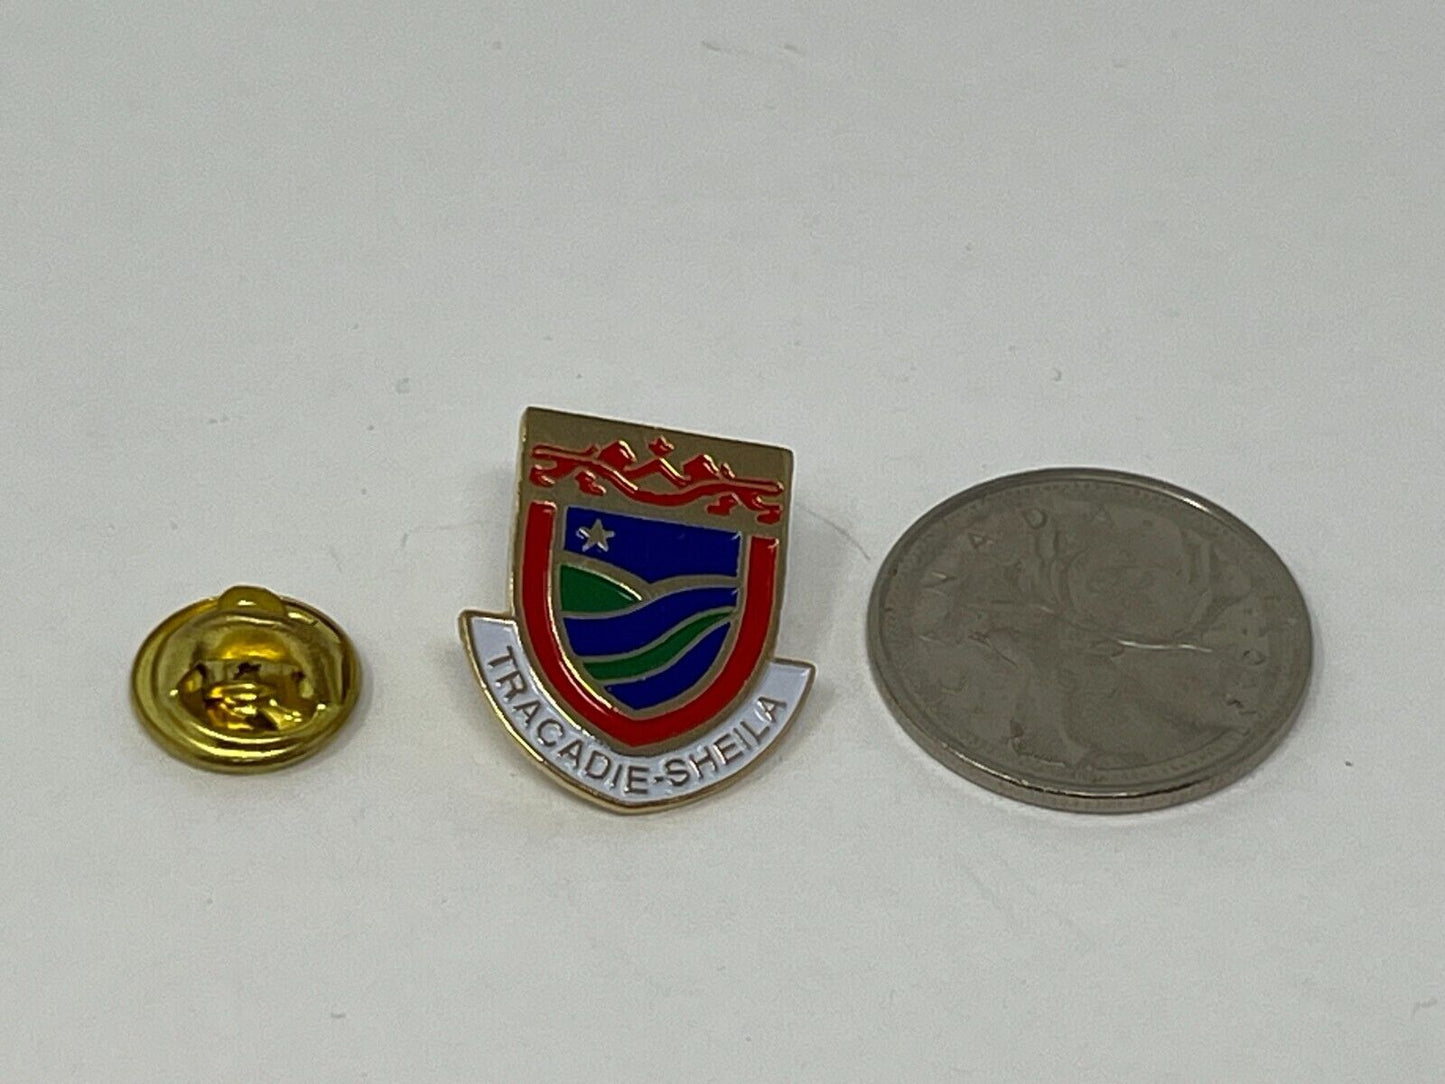 Town of Tracadie-Sheila New Brunswick Souvenir Cities & States Lapel Pin SP2